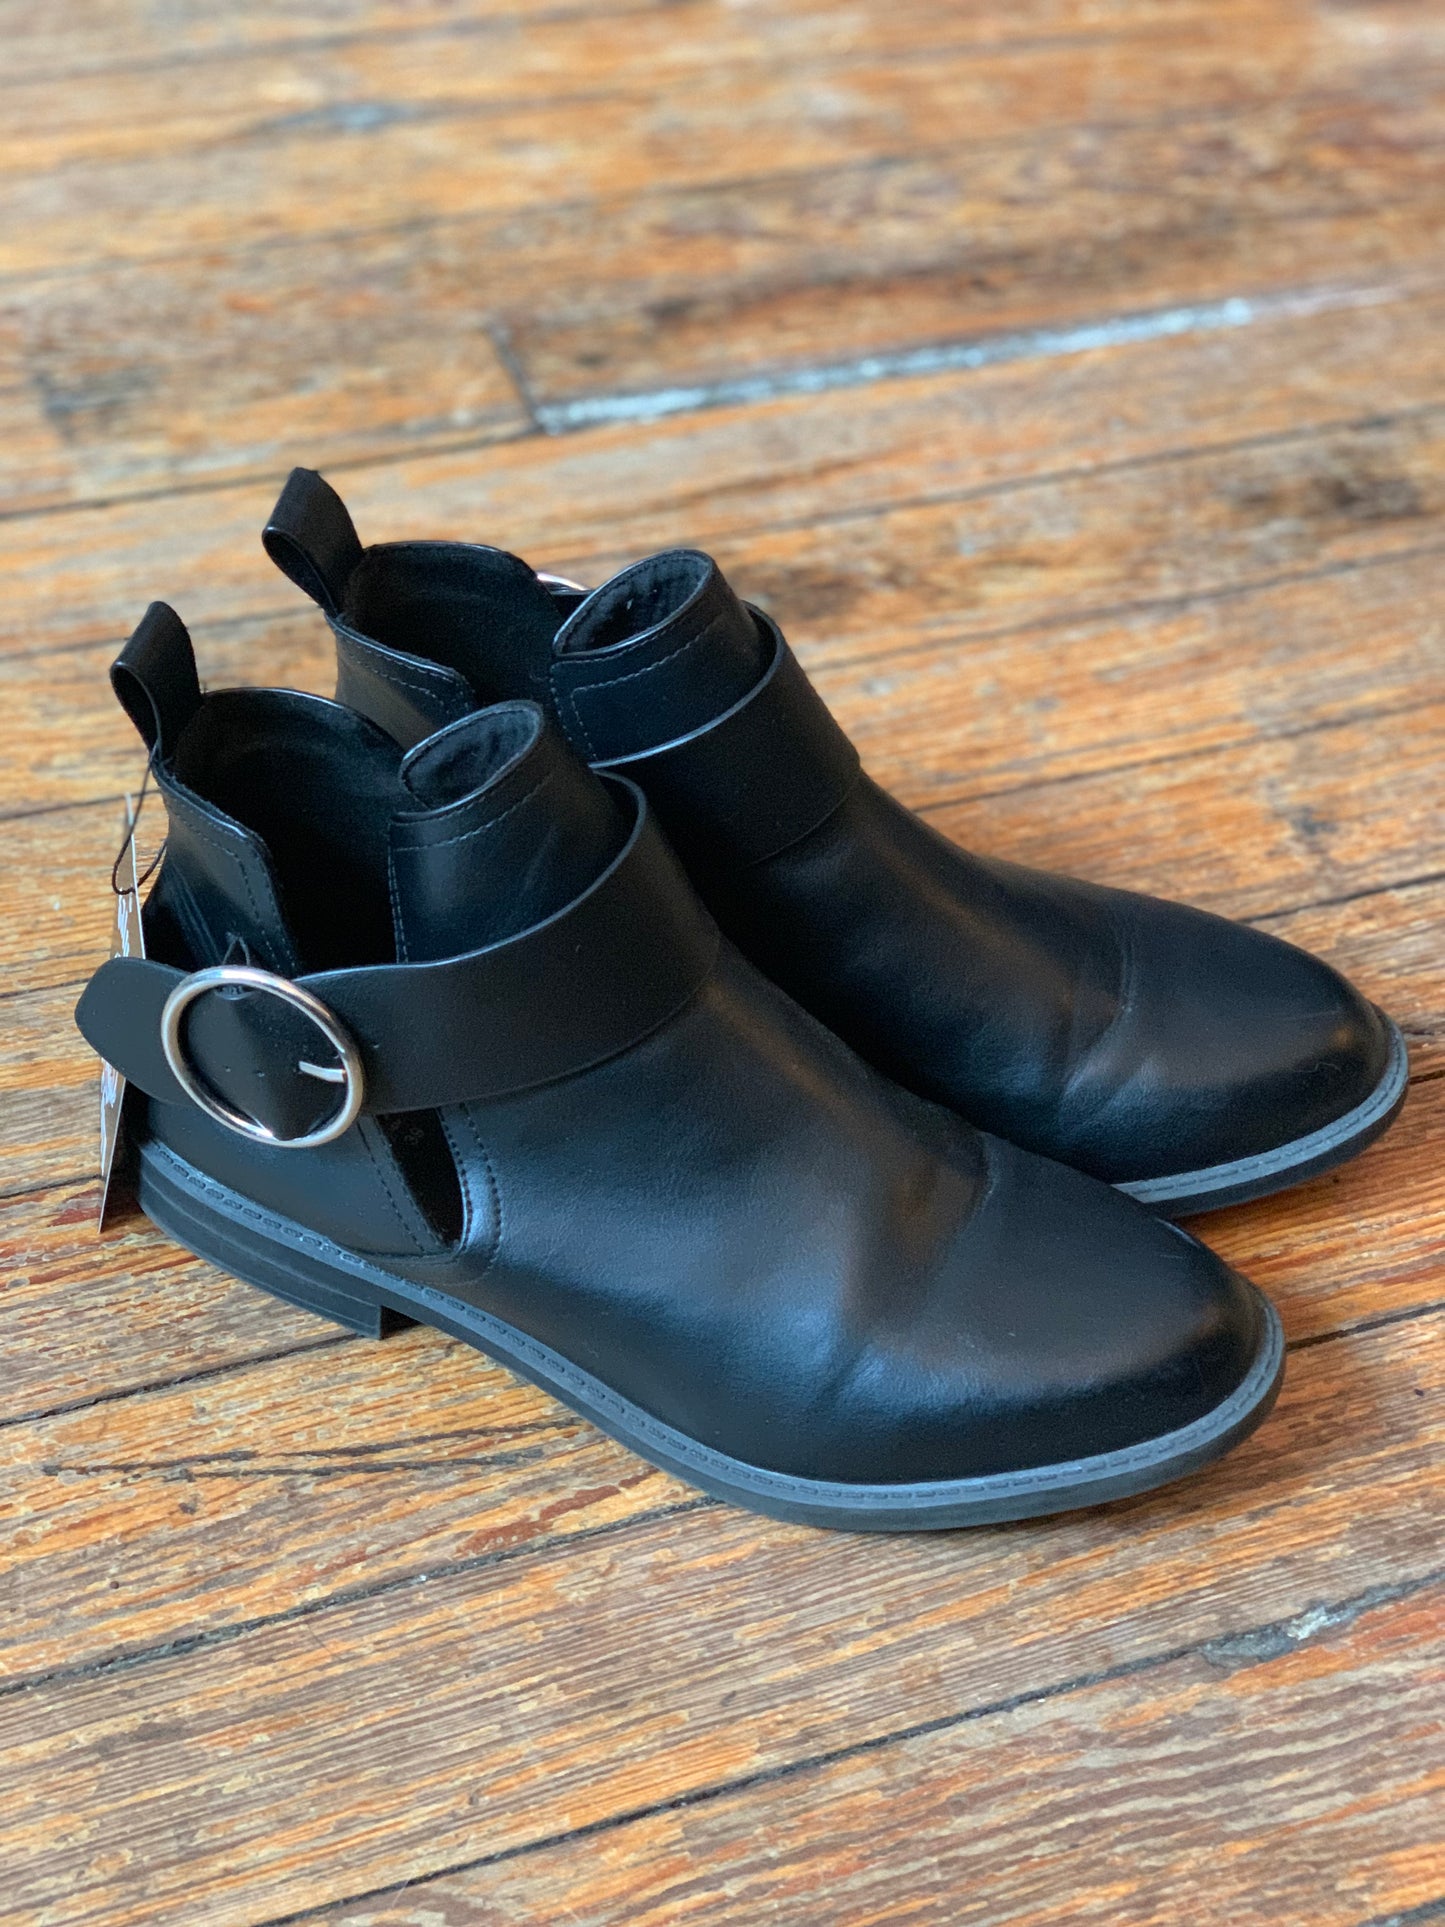 Black Faux Leather Buckle Cut-Out Booties